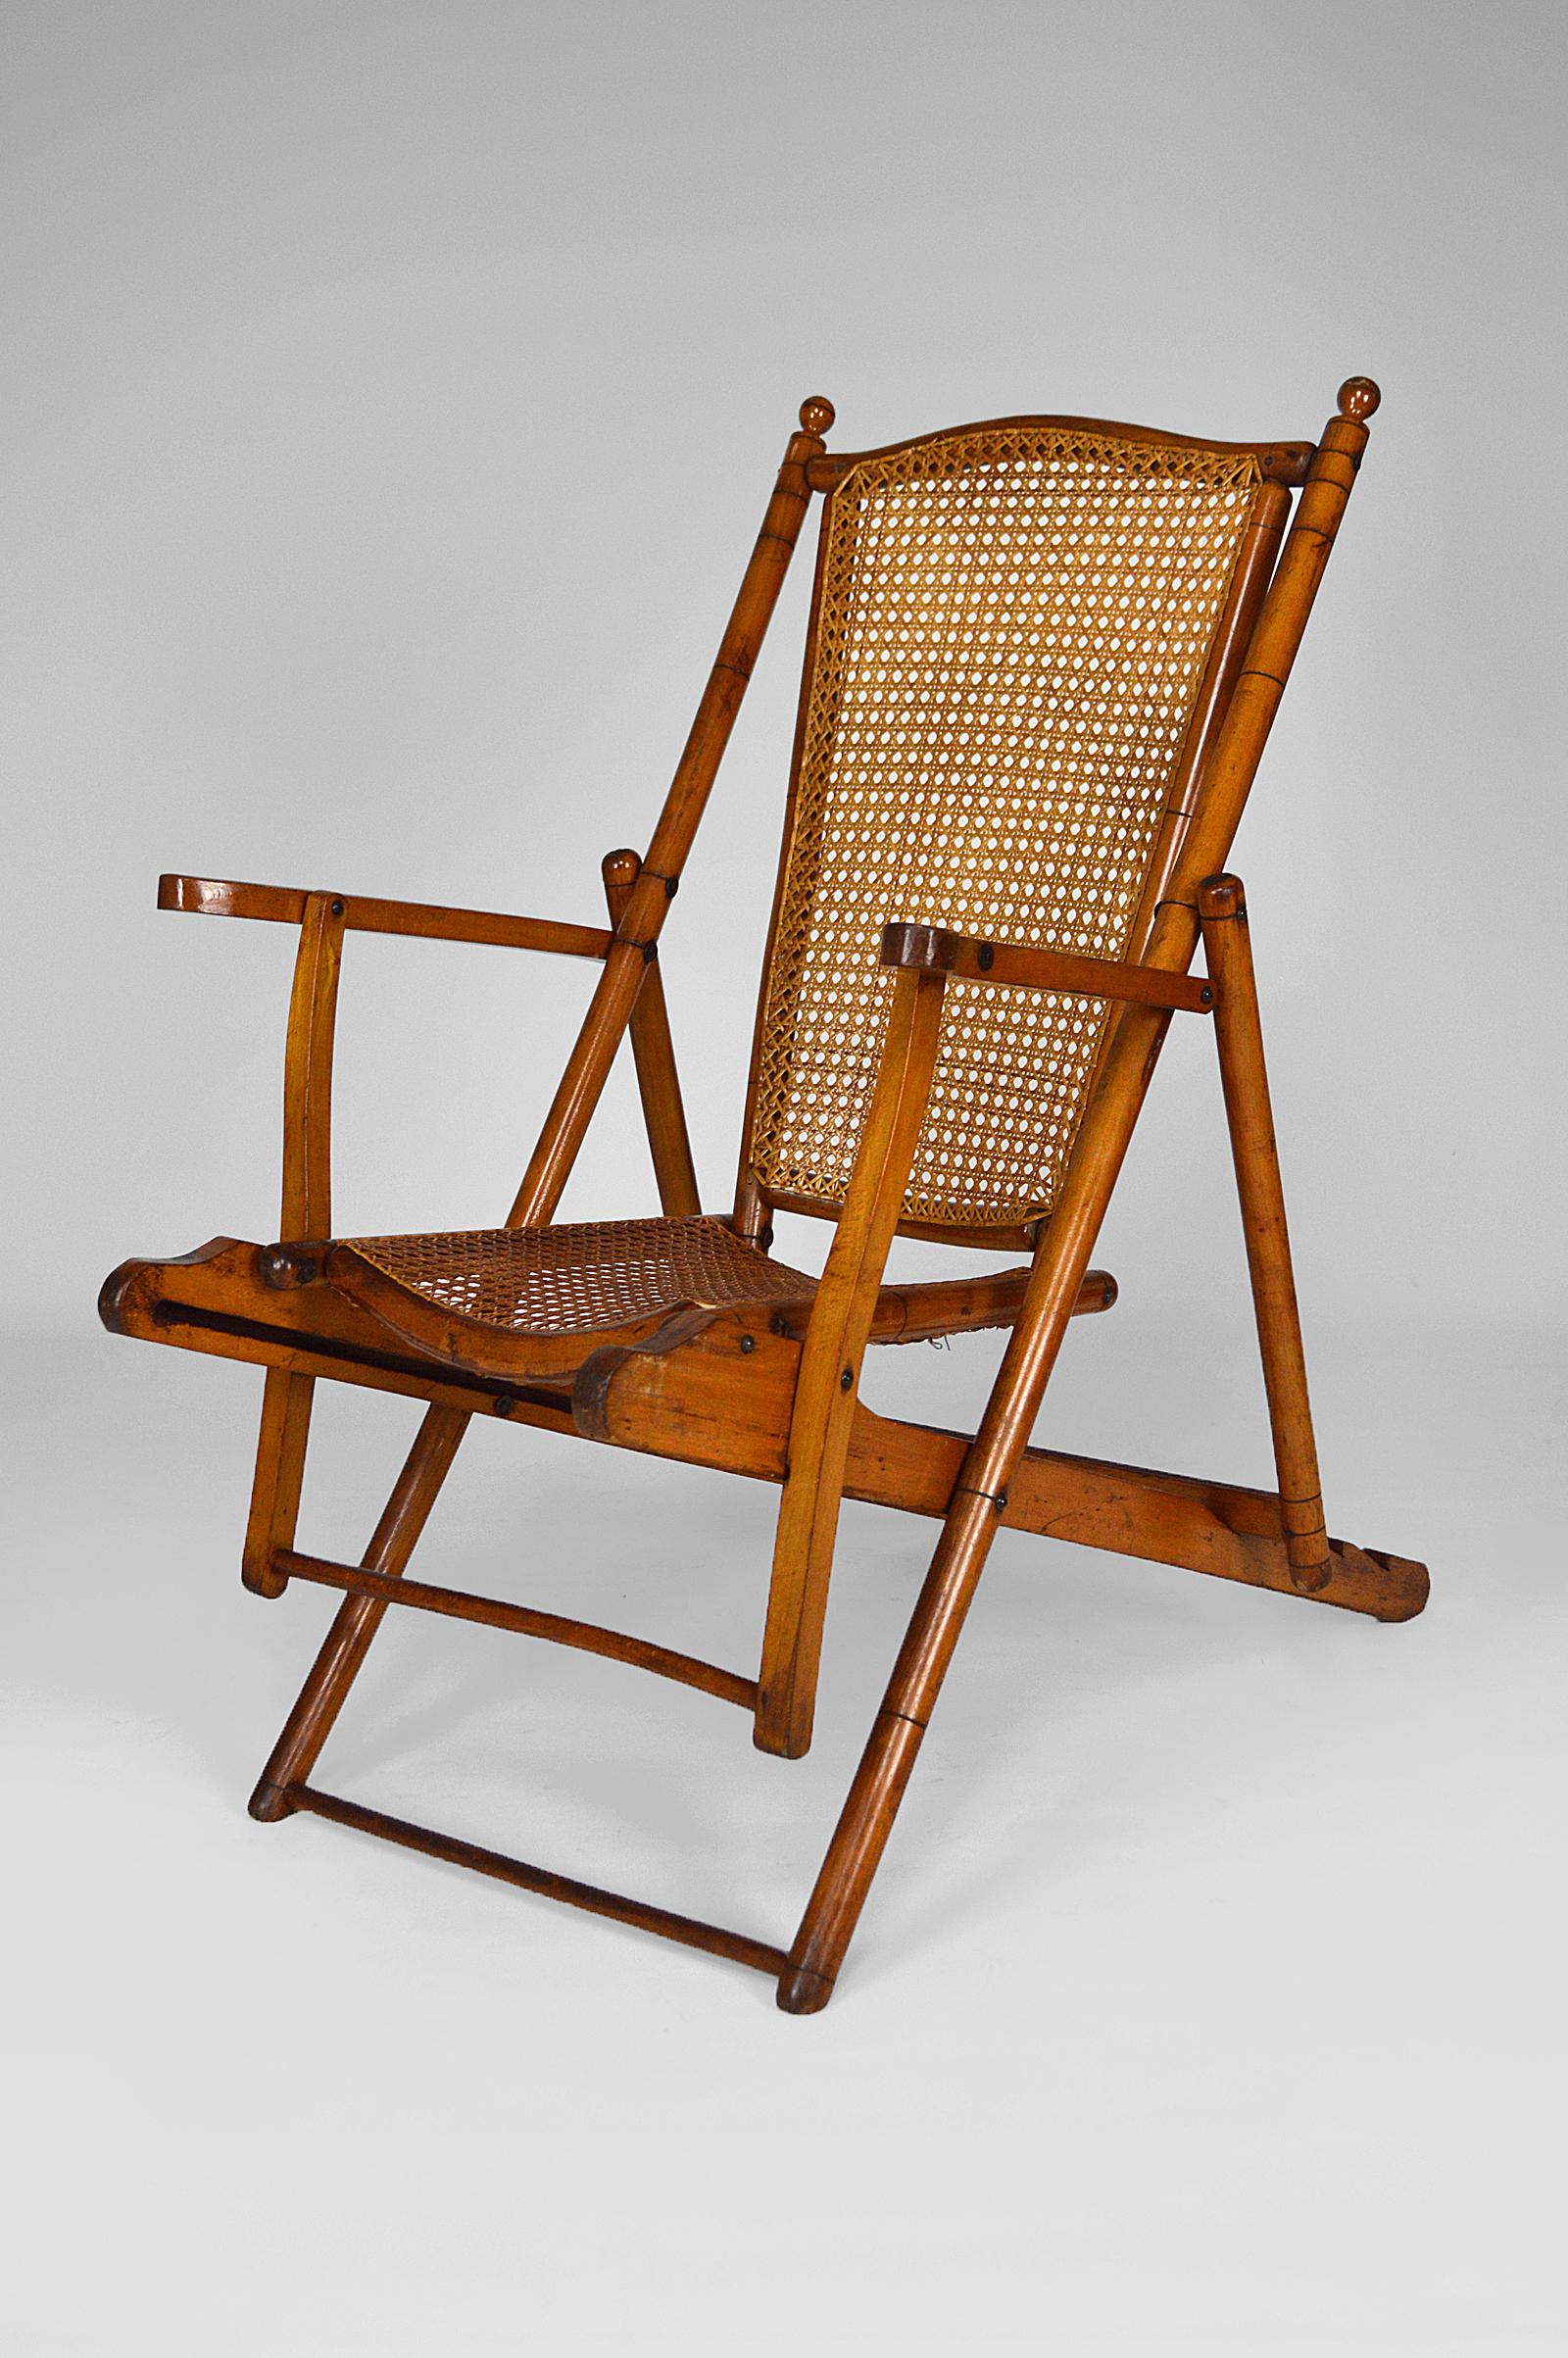 Antique folding lounge steamer deck chair / armchair.

Victorian colonial / Anglo-Indian style,
circa 1900.

Good condition.